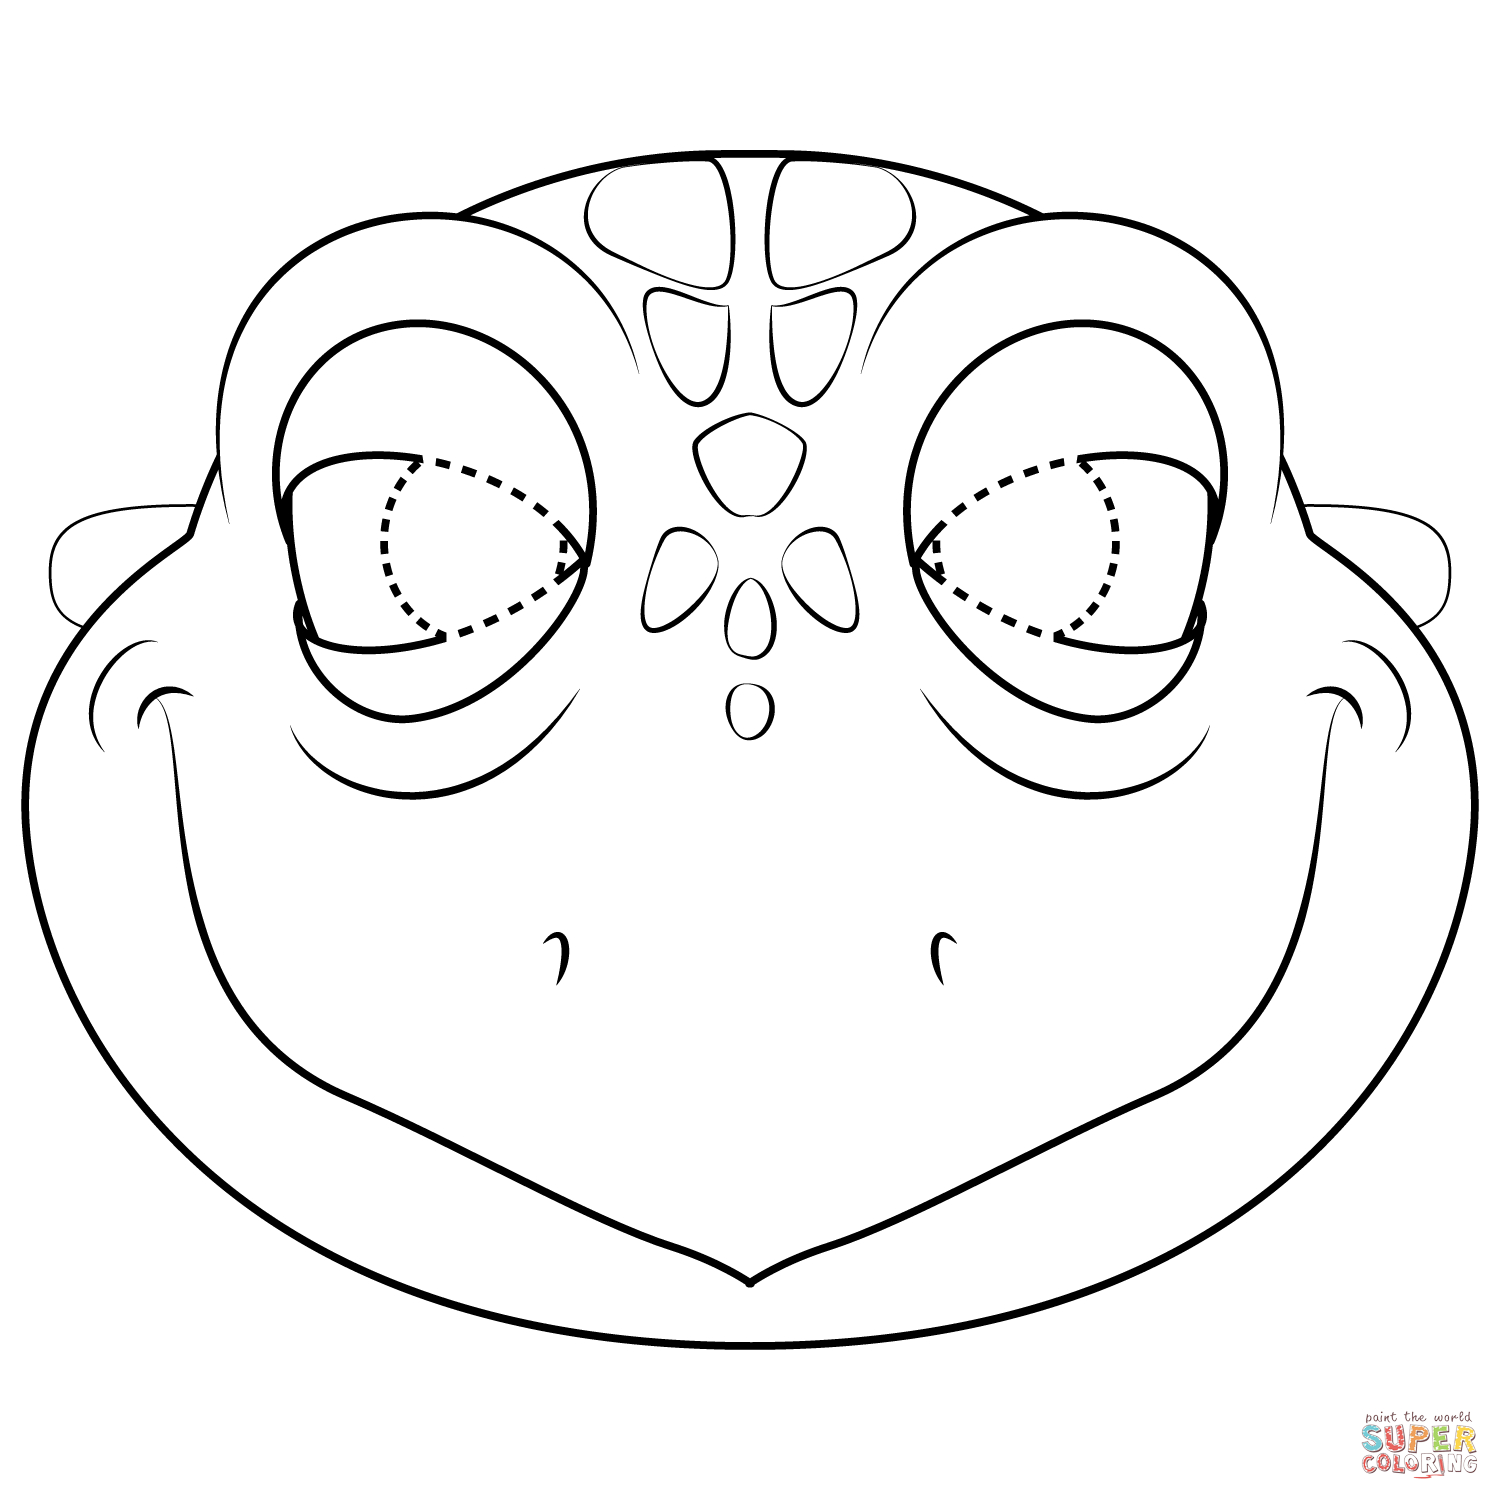 Turtle Mask Coloring Page | Free Printable Coloring Pages - Free Printable Lizard Mask